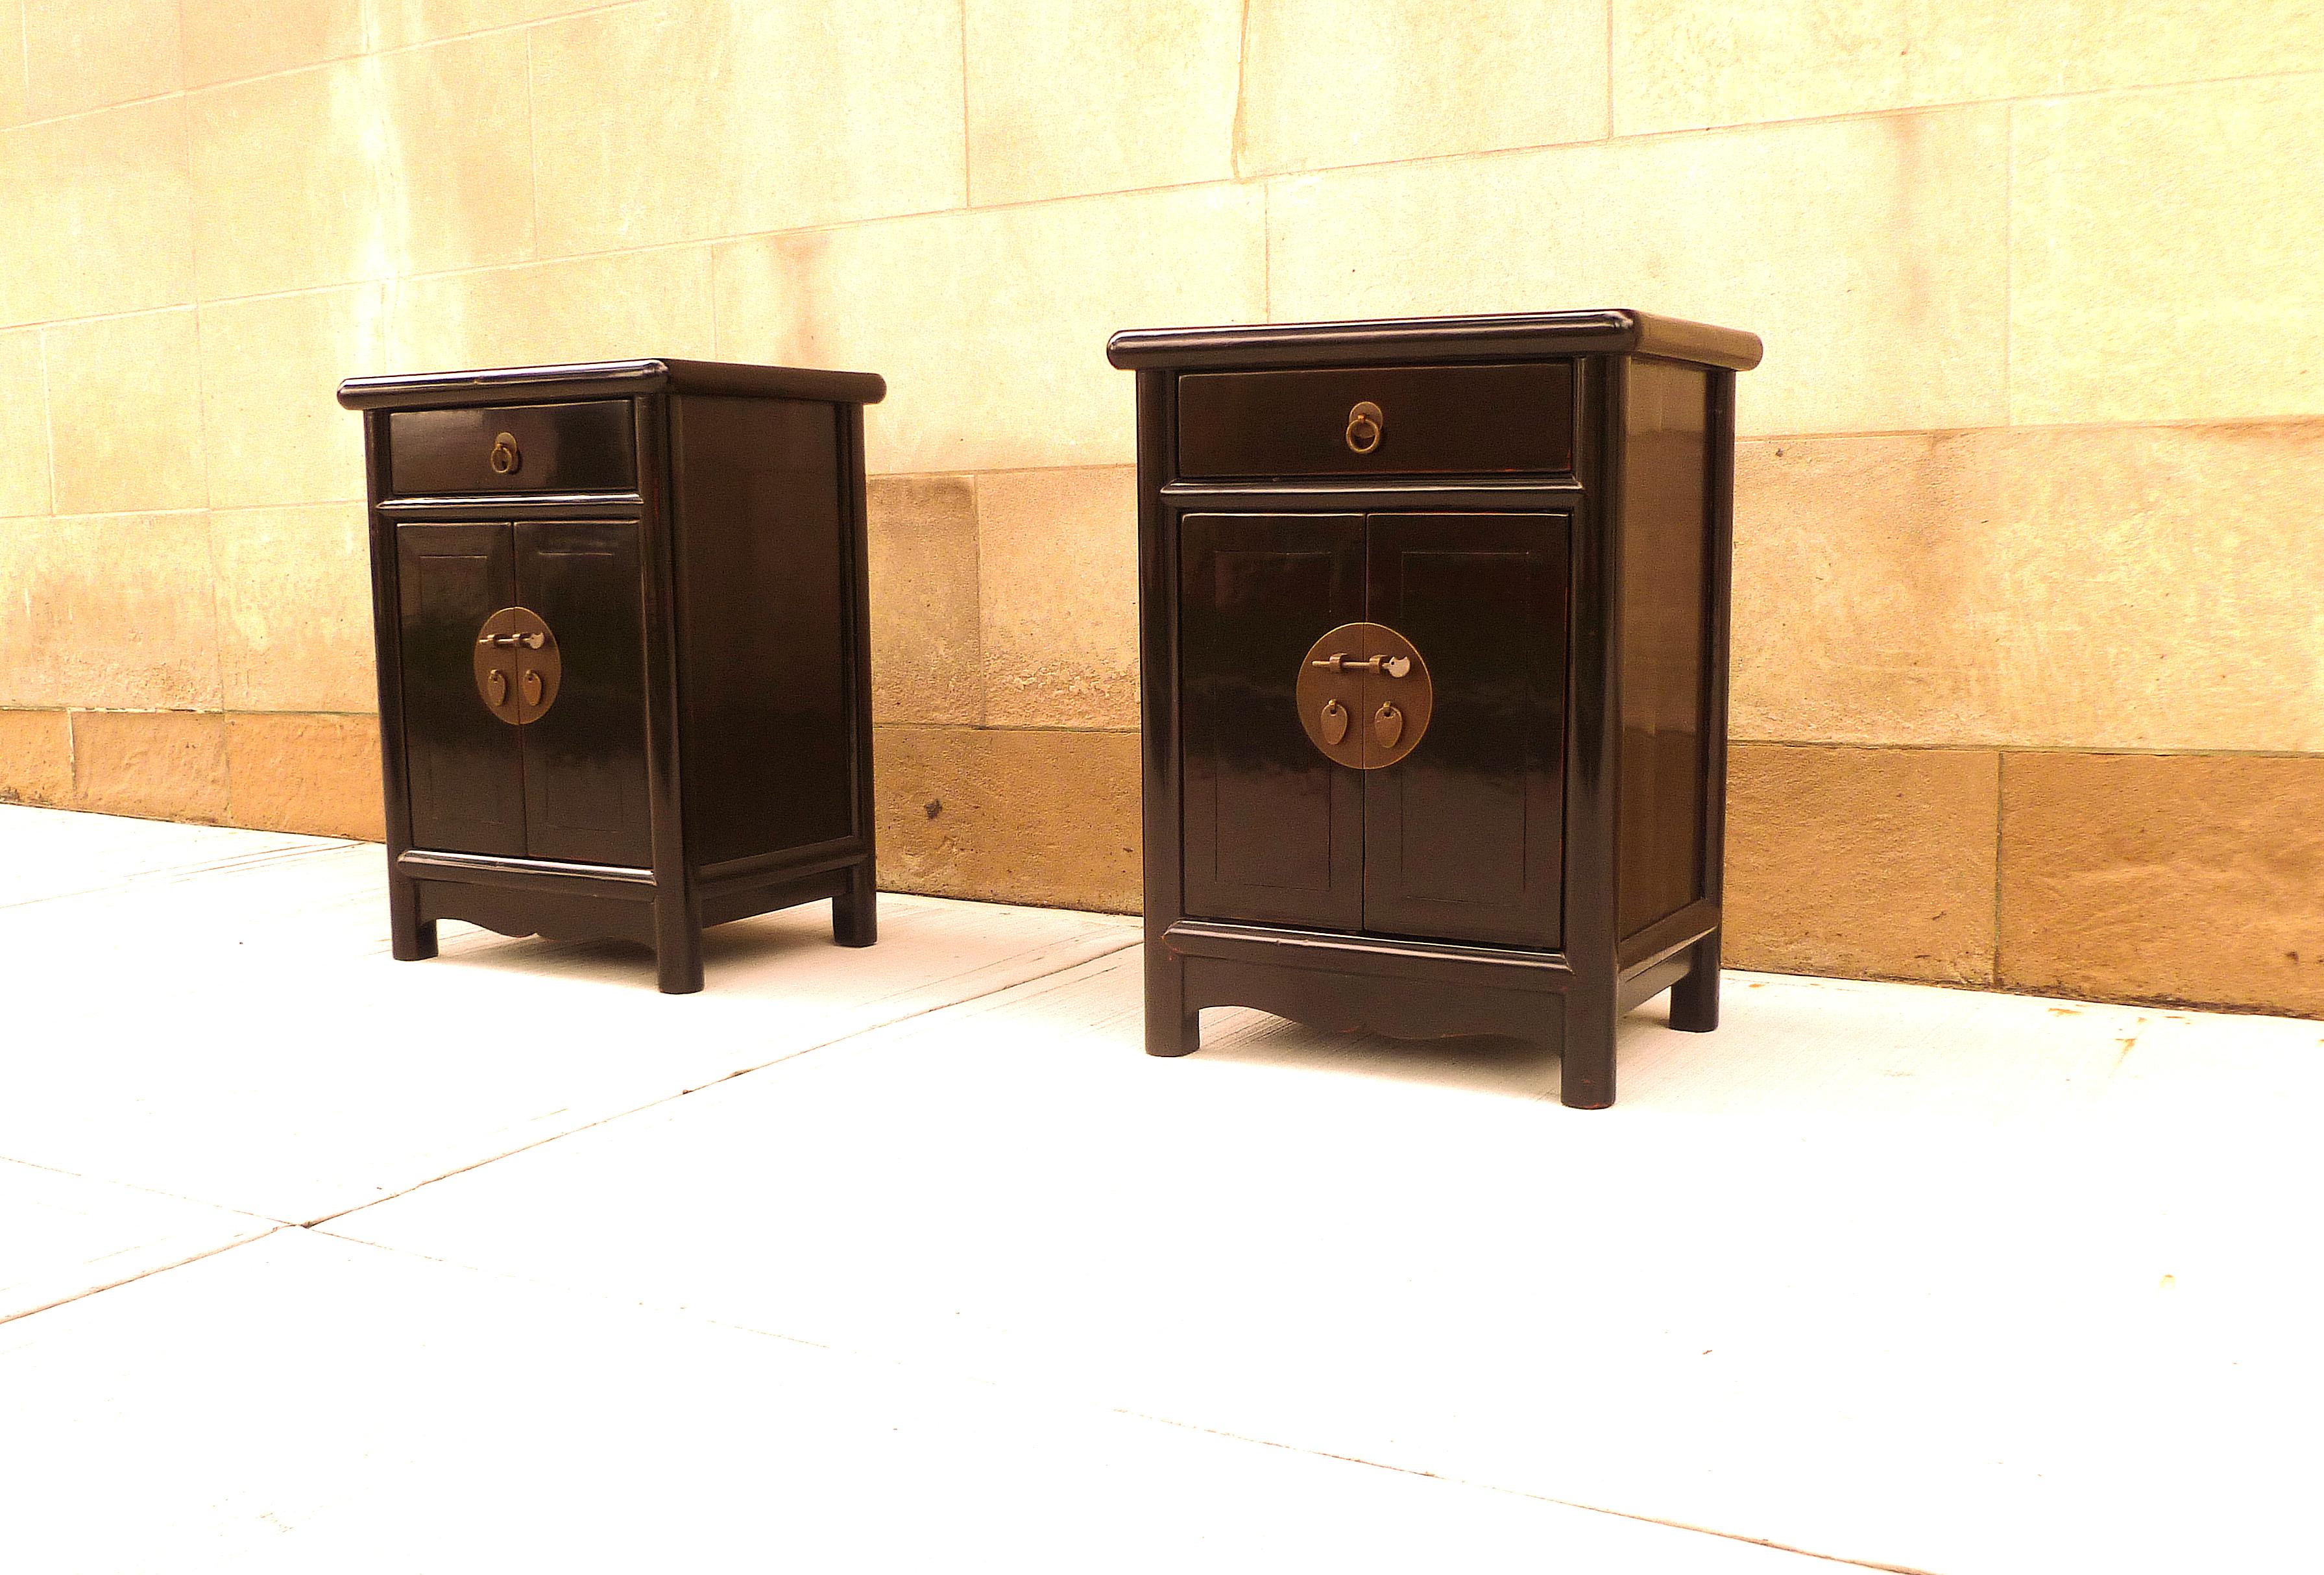 Polished Pair of Fine Black Lacquer Chests